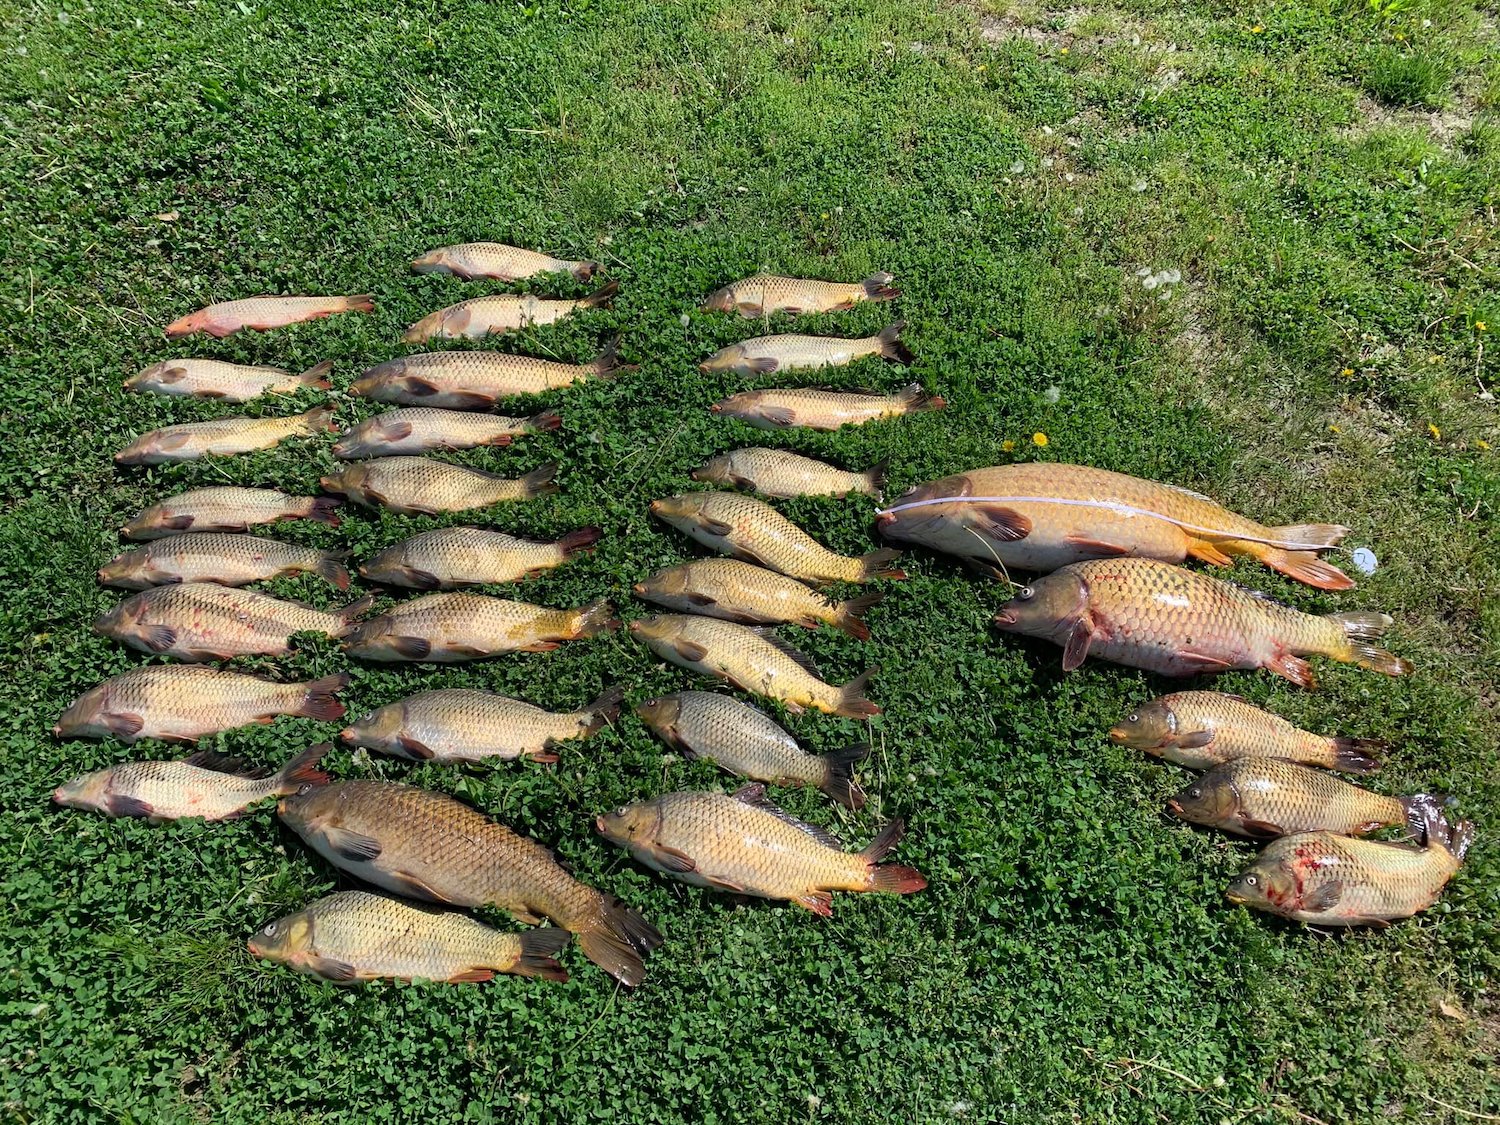 Three Fishermen Fined Thousands of Dollars for Keeping Too Many Carp